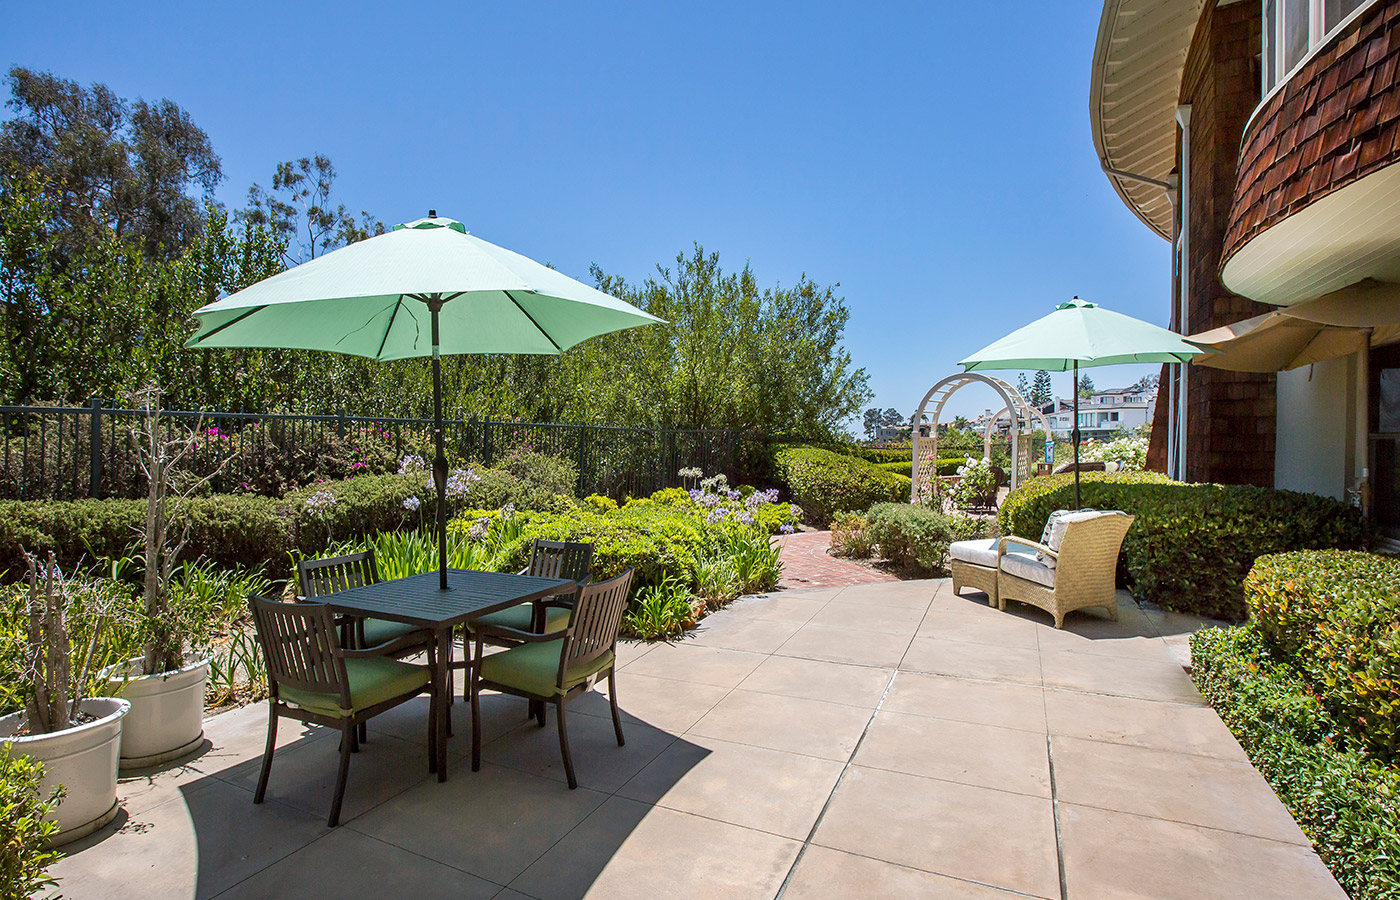 Patio and garden with tables, chairs and umbrellas.